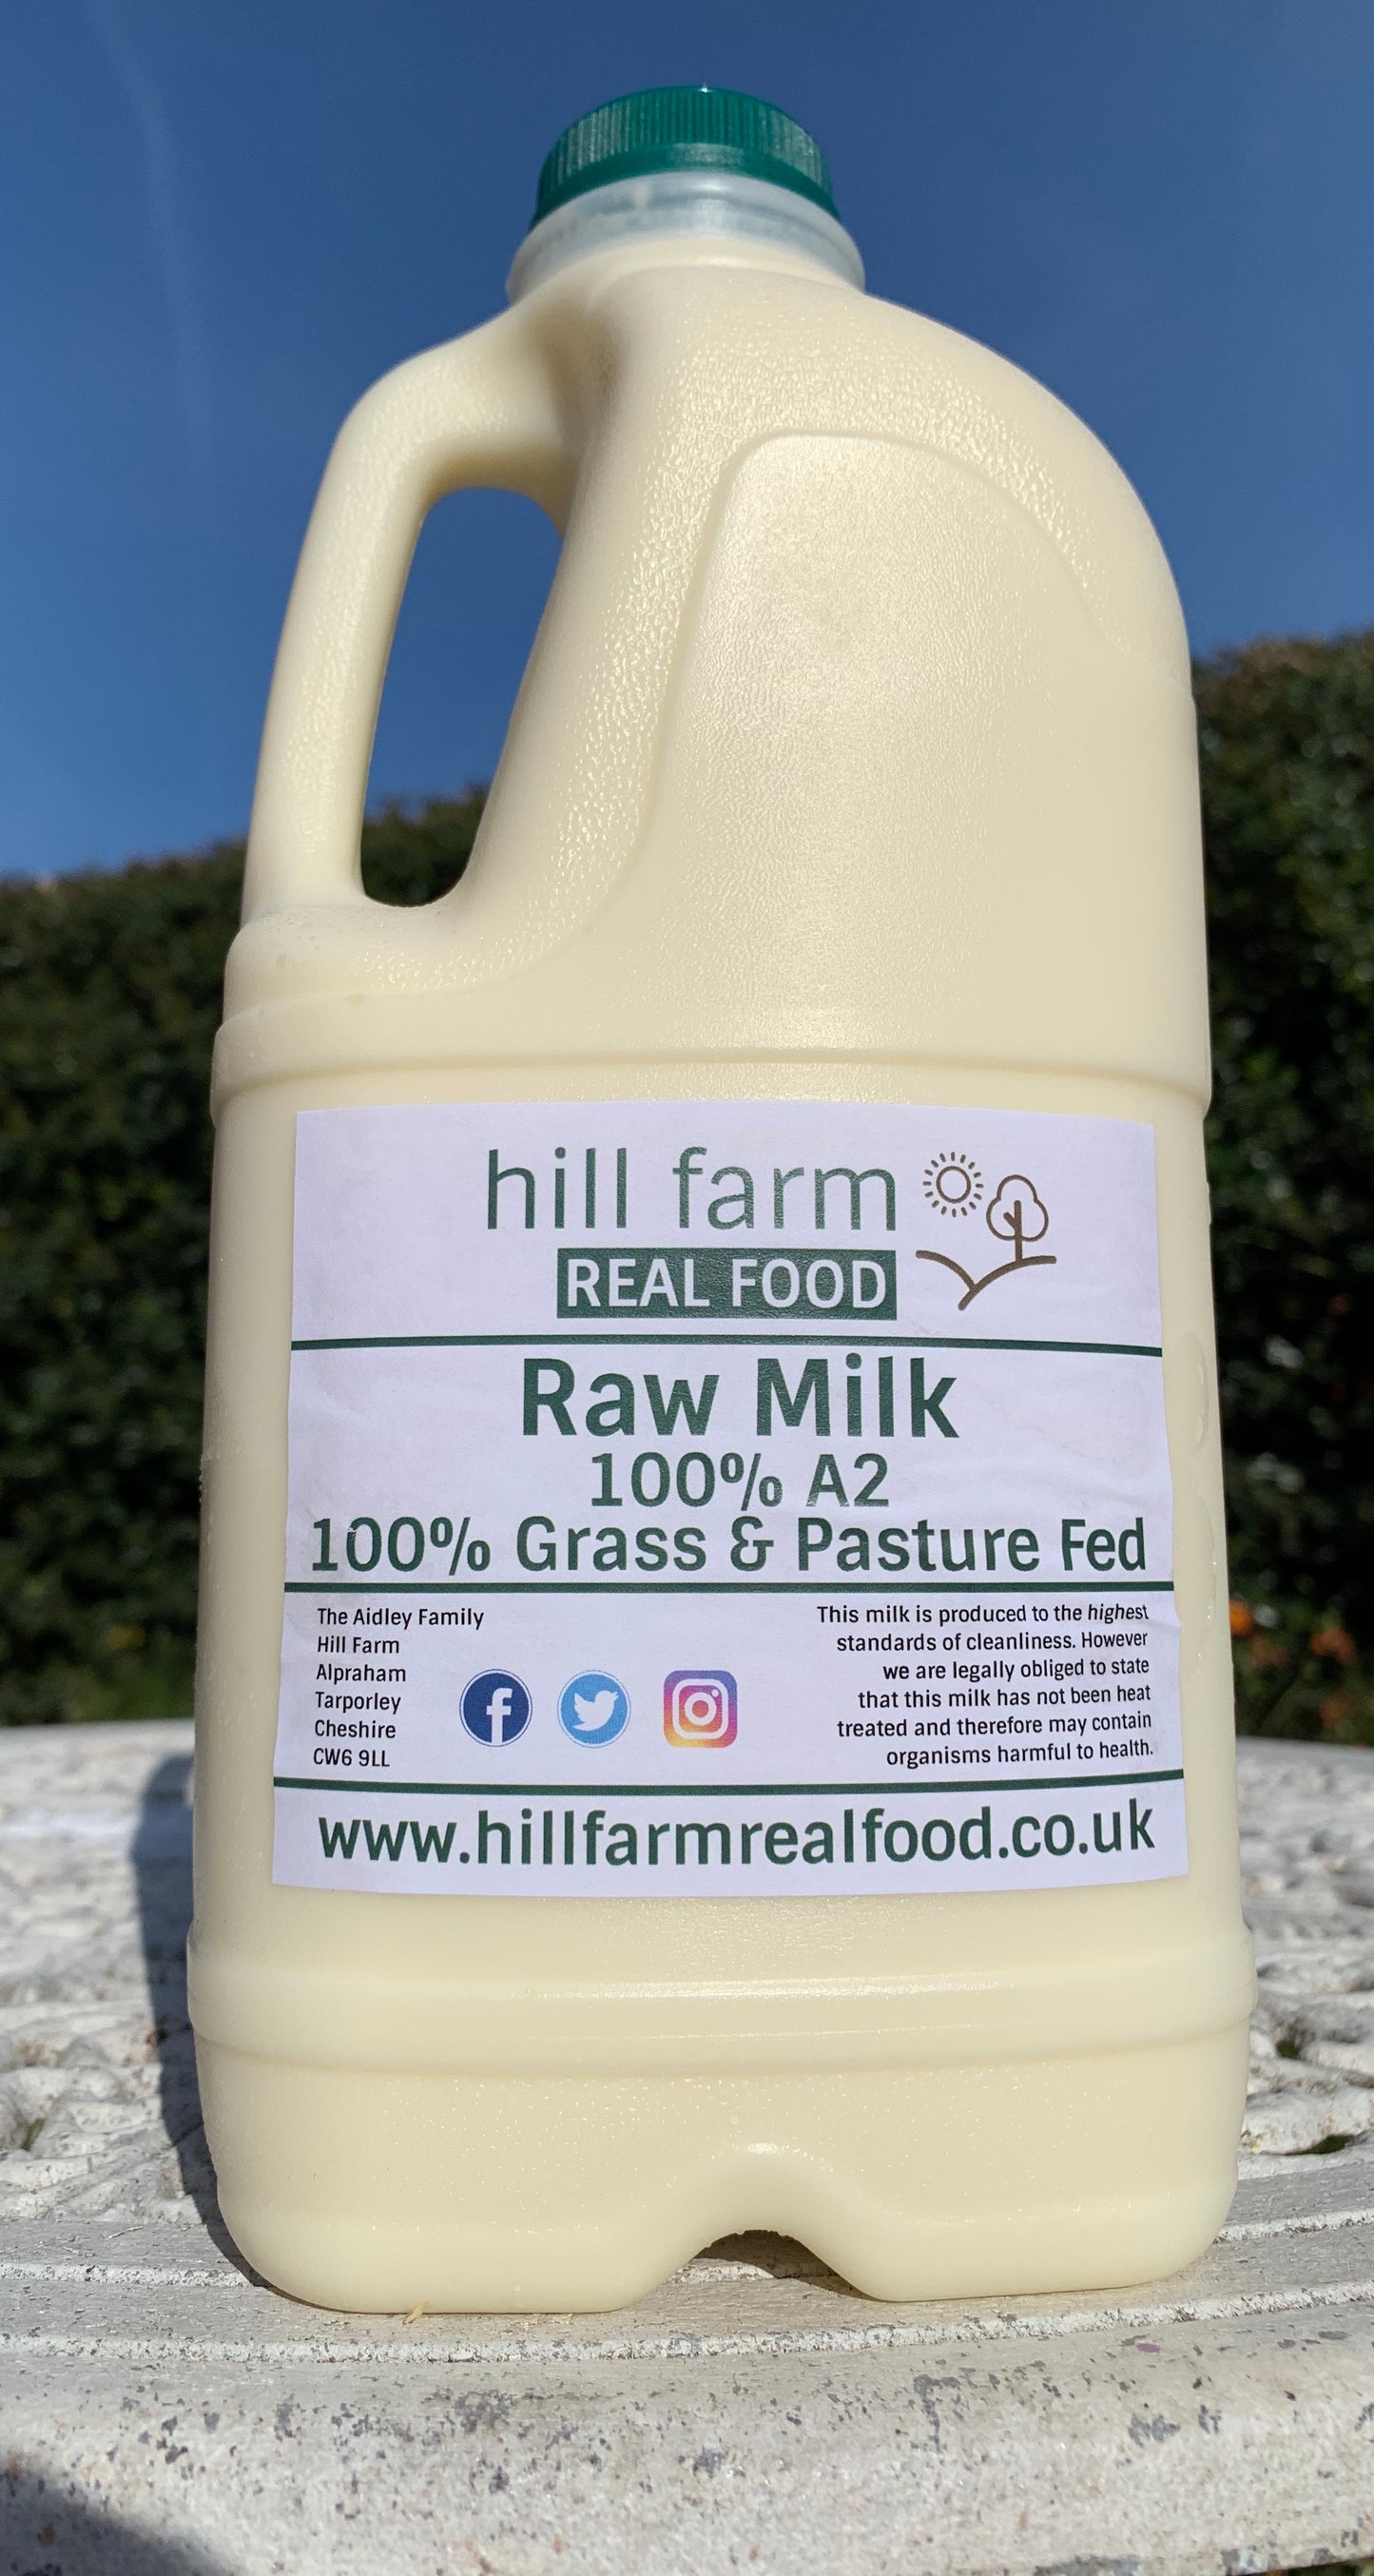 Raw Organic A2 Grass Fed Milk, 2 litre bottle - LOCAL PICKUP ONLY - please do not order for courier delivery. Thanks :-)